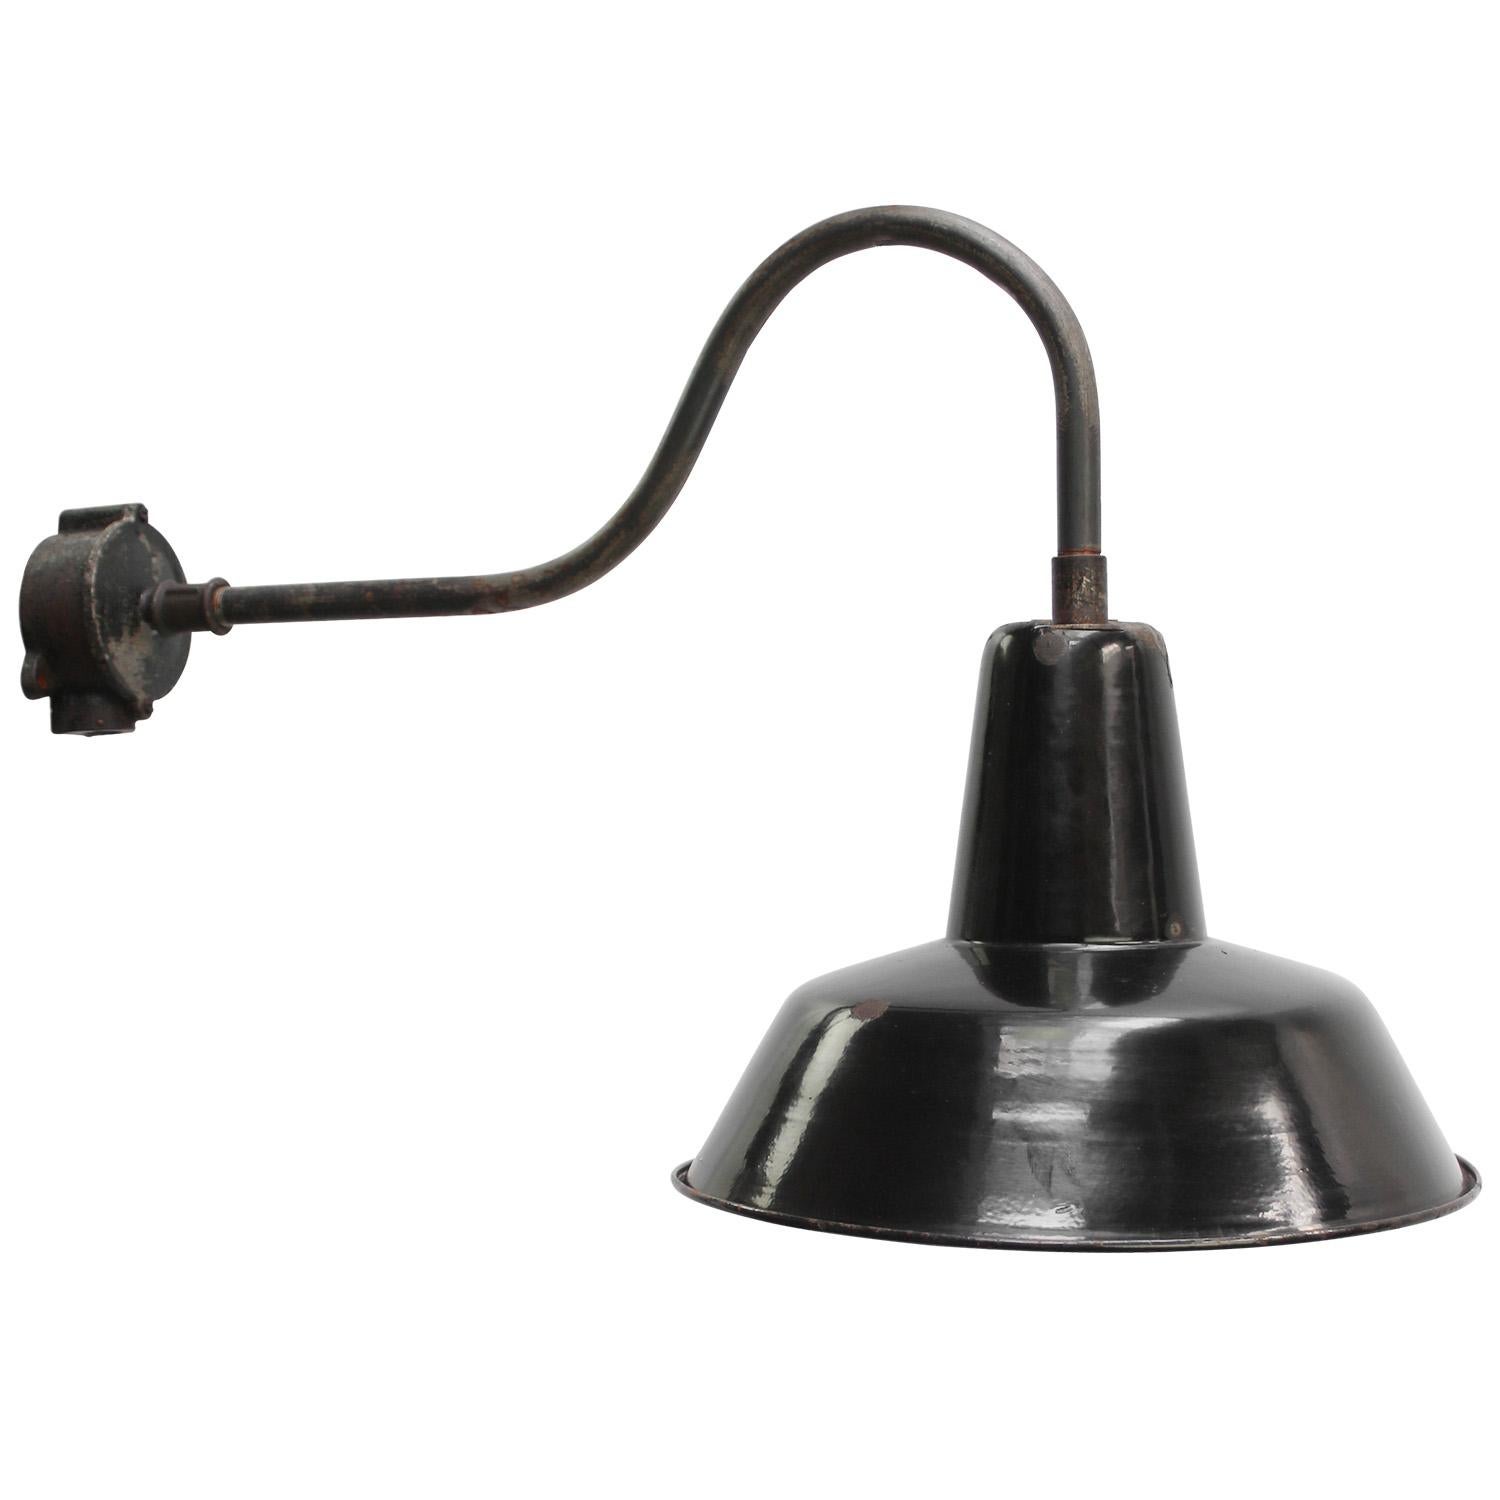 French factory wall light
Black enamel, white interior

diameter cast iron wall piece: 10.5 cm, 2 holes to secure

Shipped in 2 parts

Weight: 1.80 kg / 4 lb

Priced per individual item. All lamps have been made suitable by international